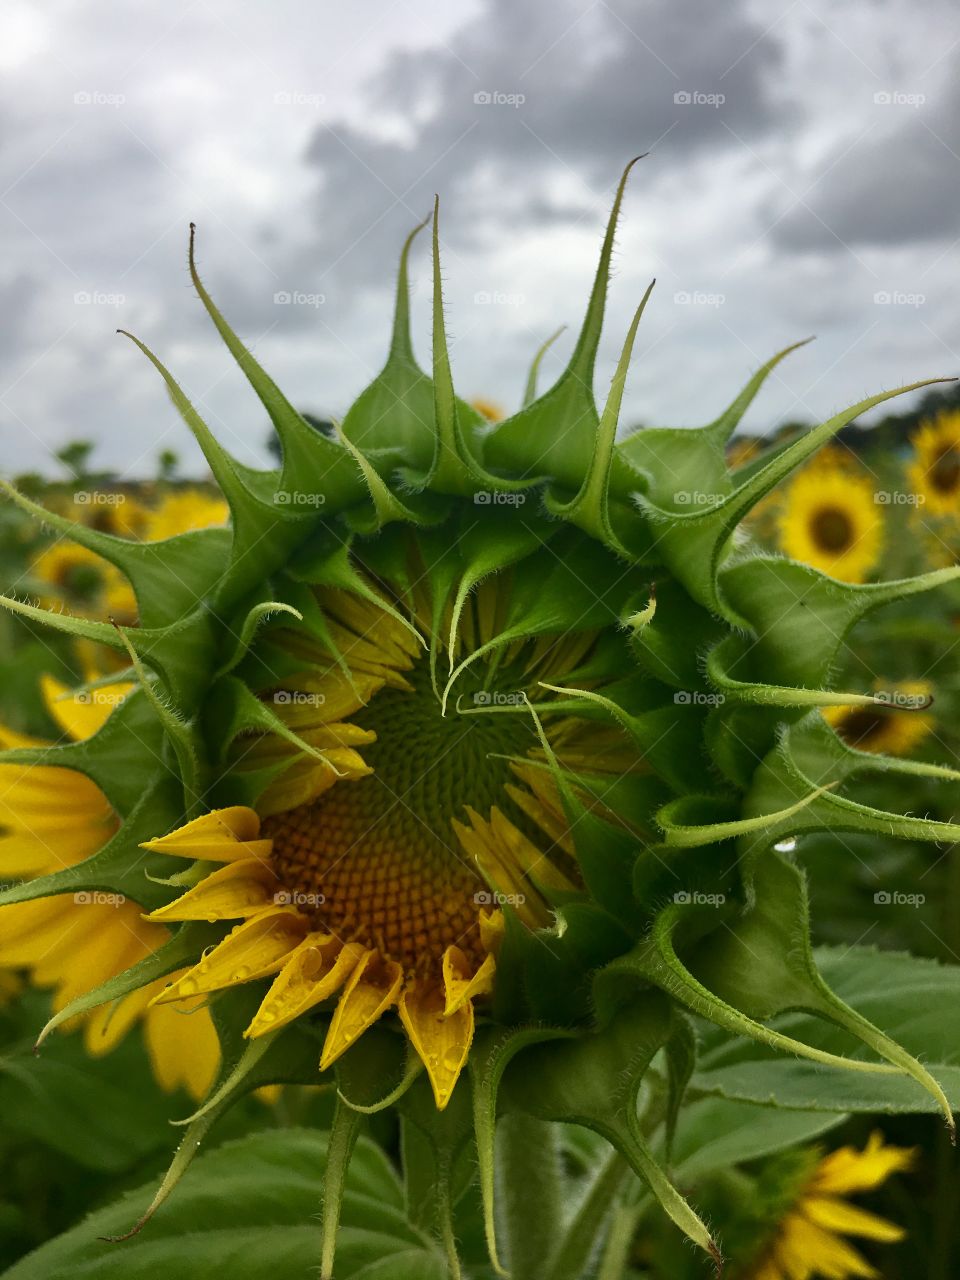 Blooming Sunflowers 